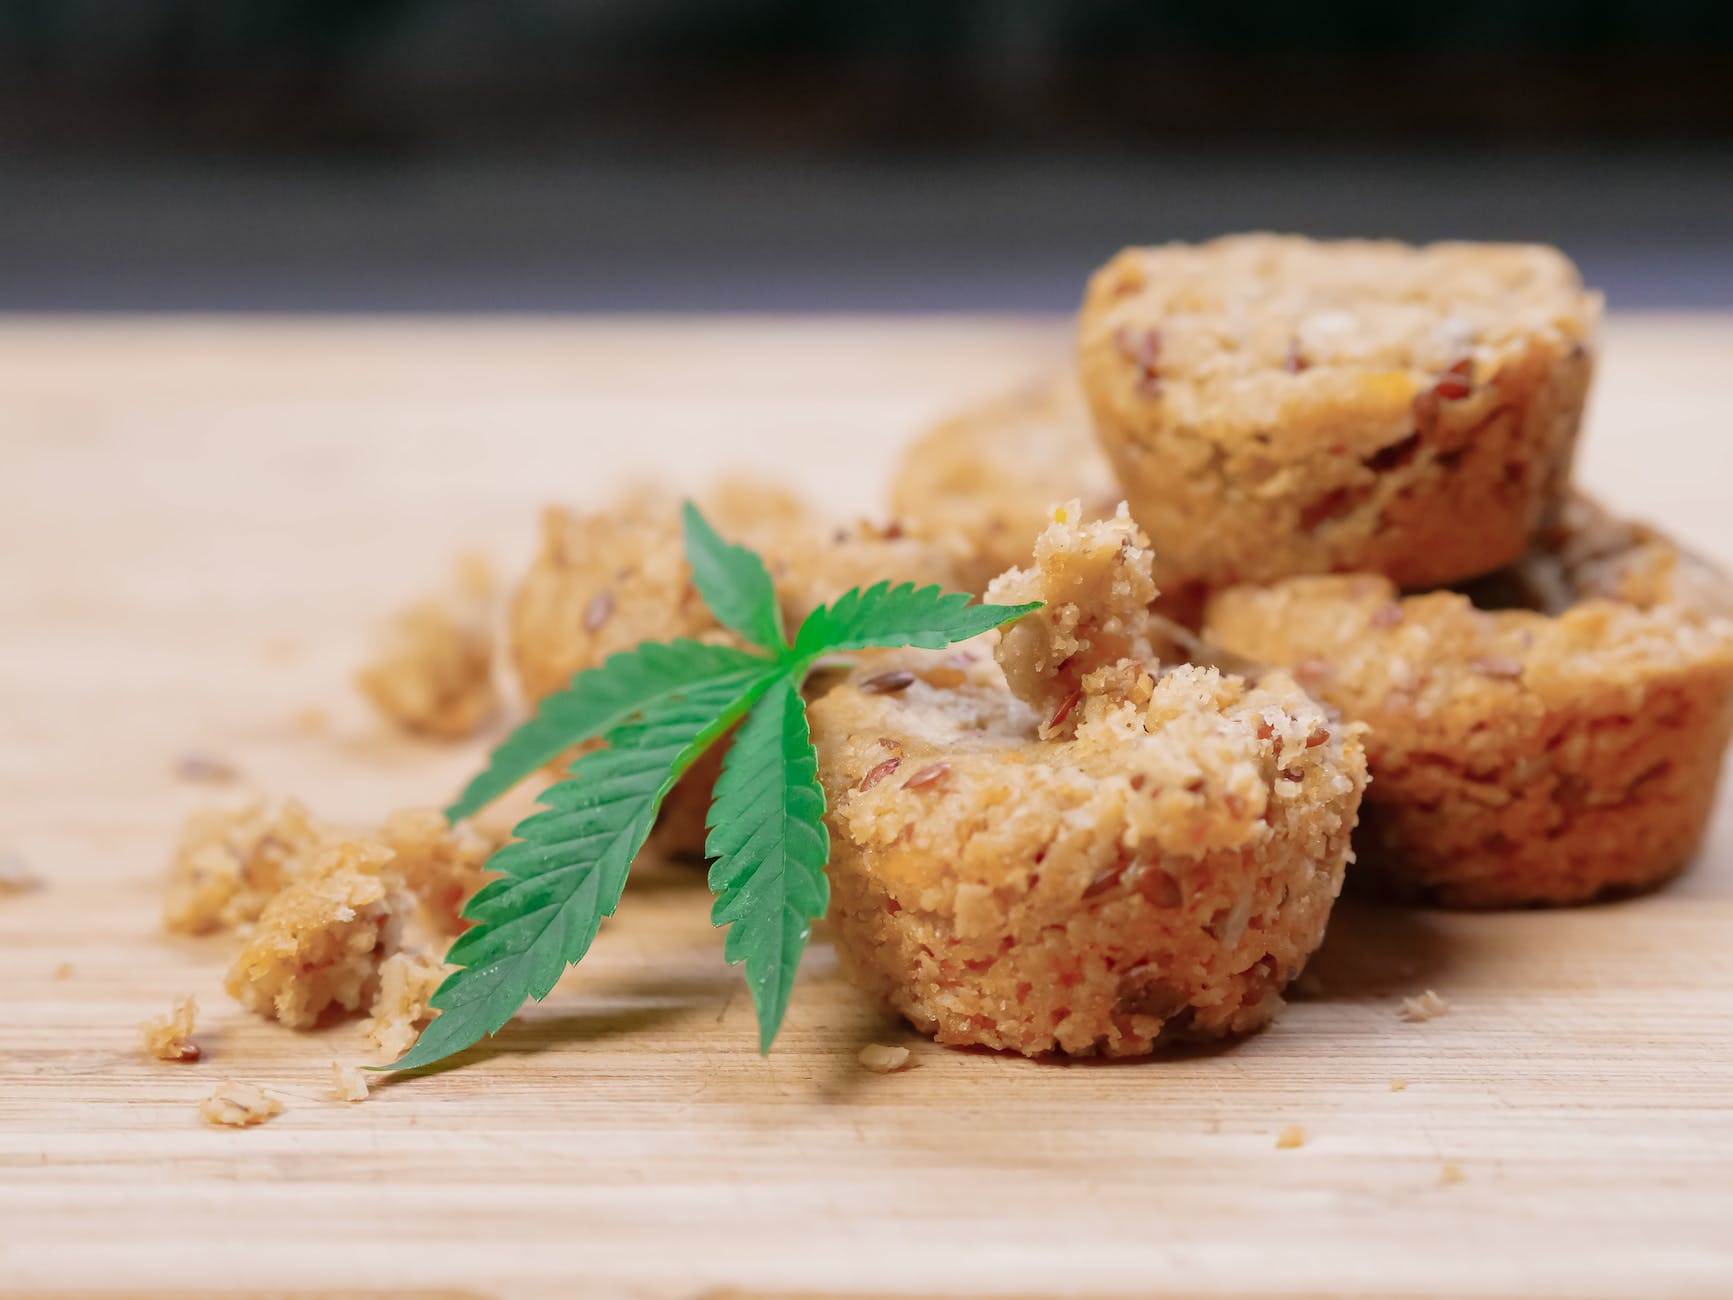 Photo Of Cannibis Leaves Leaning On Muffins - Edible Marijuana Recipes